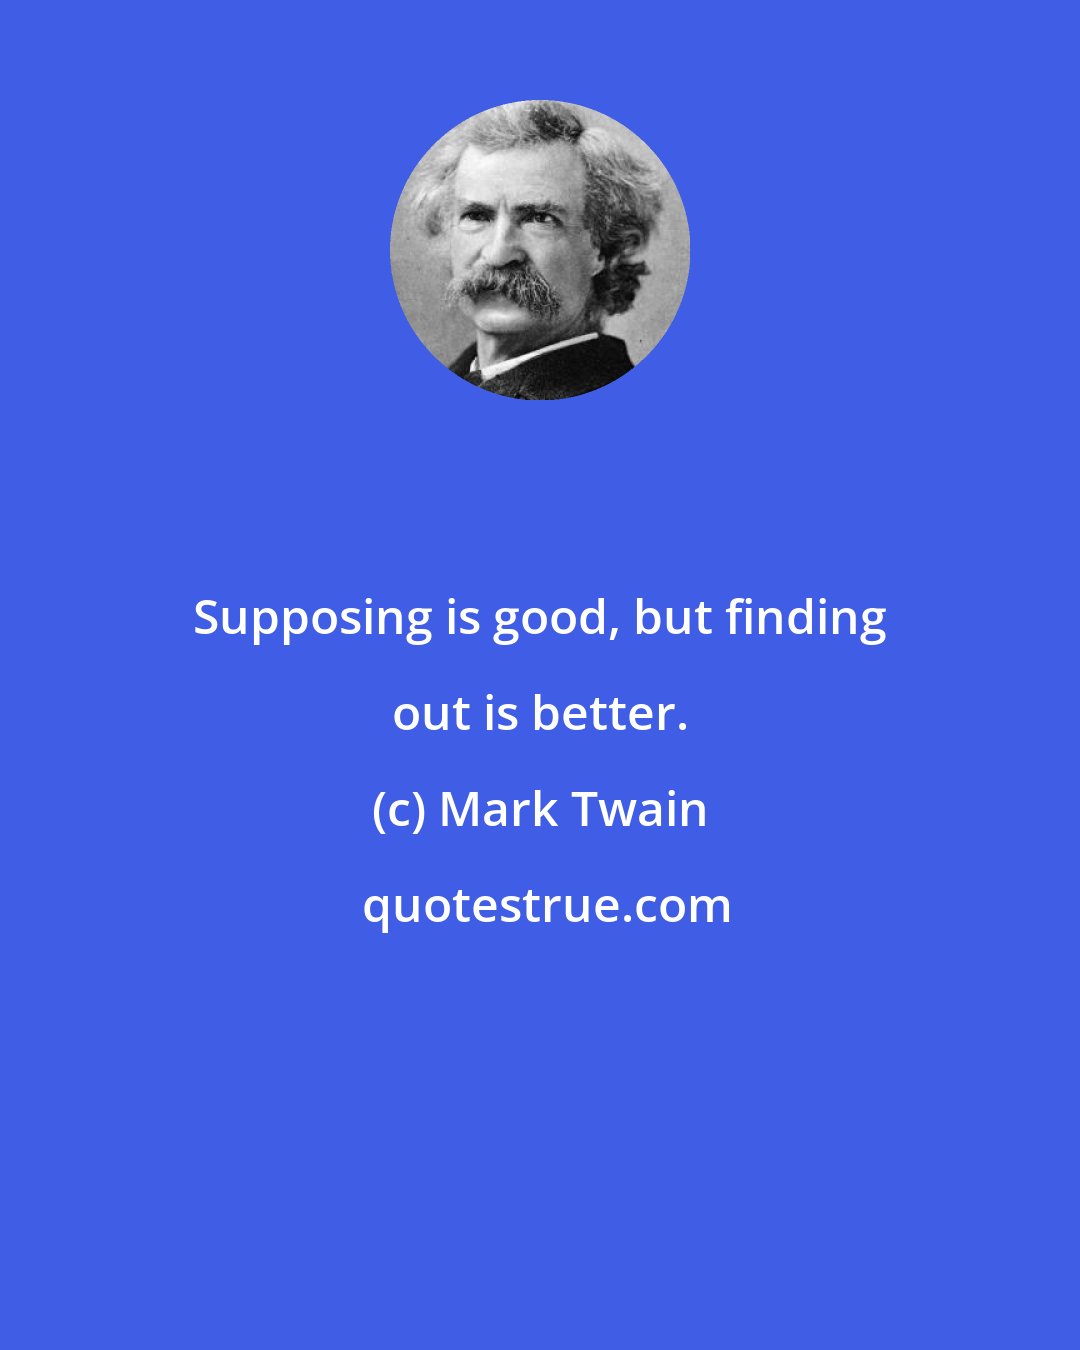 Mark Twain: Supposing is good, but finding out is better.